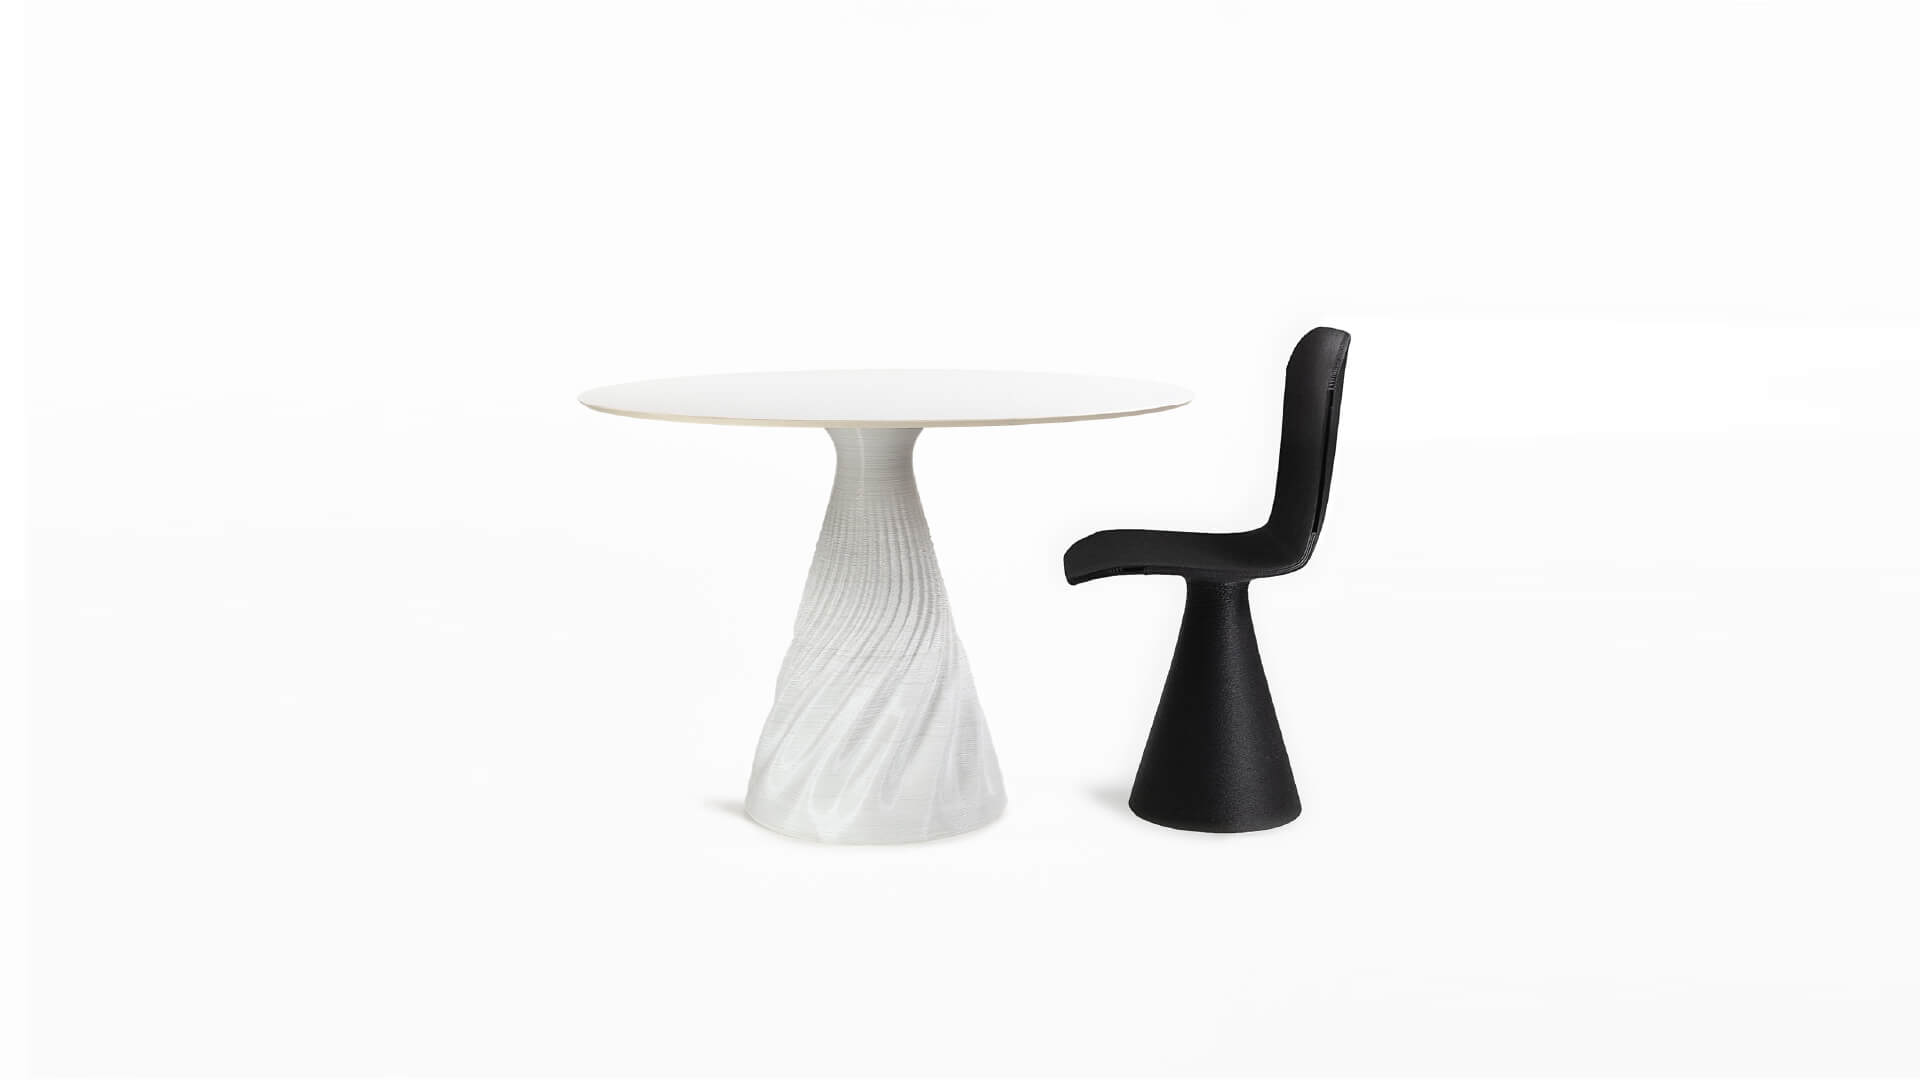 Elli Furniture - chair and table